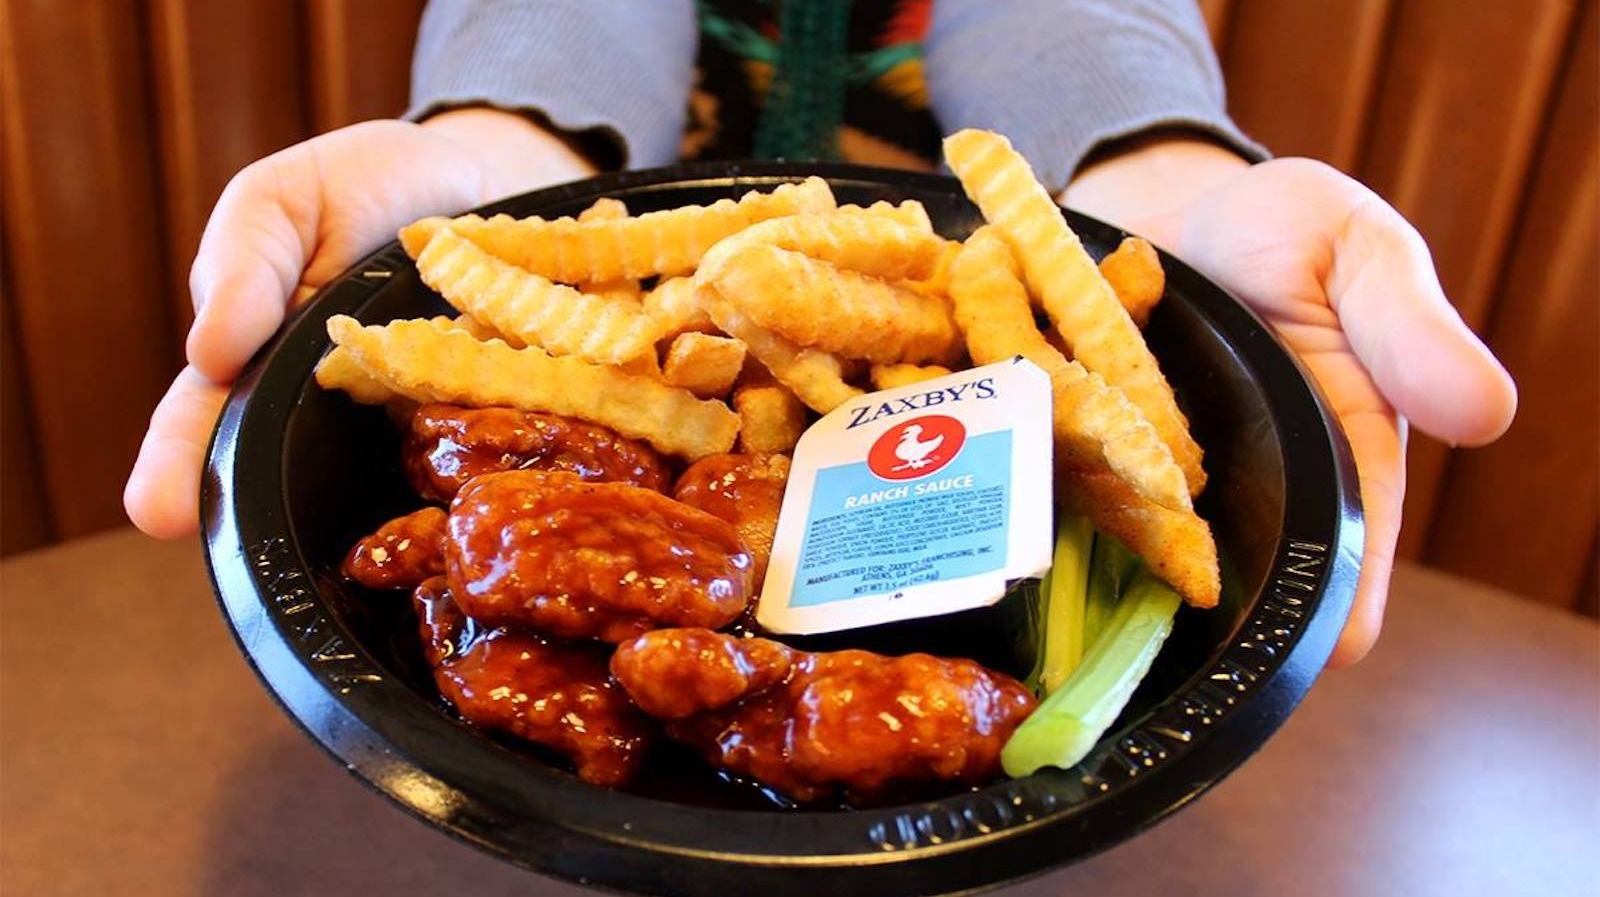 Each Zaxby’s Wing Taste Ranked Worst To Finest